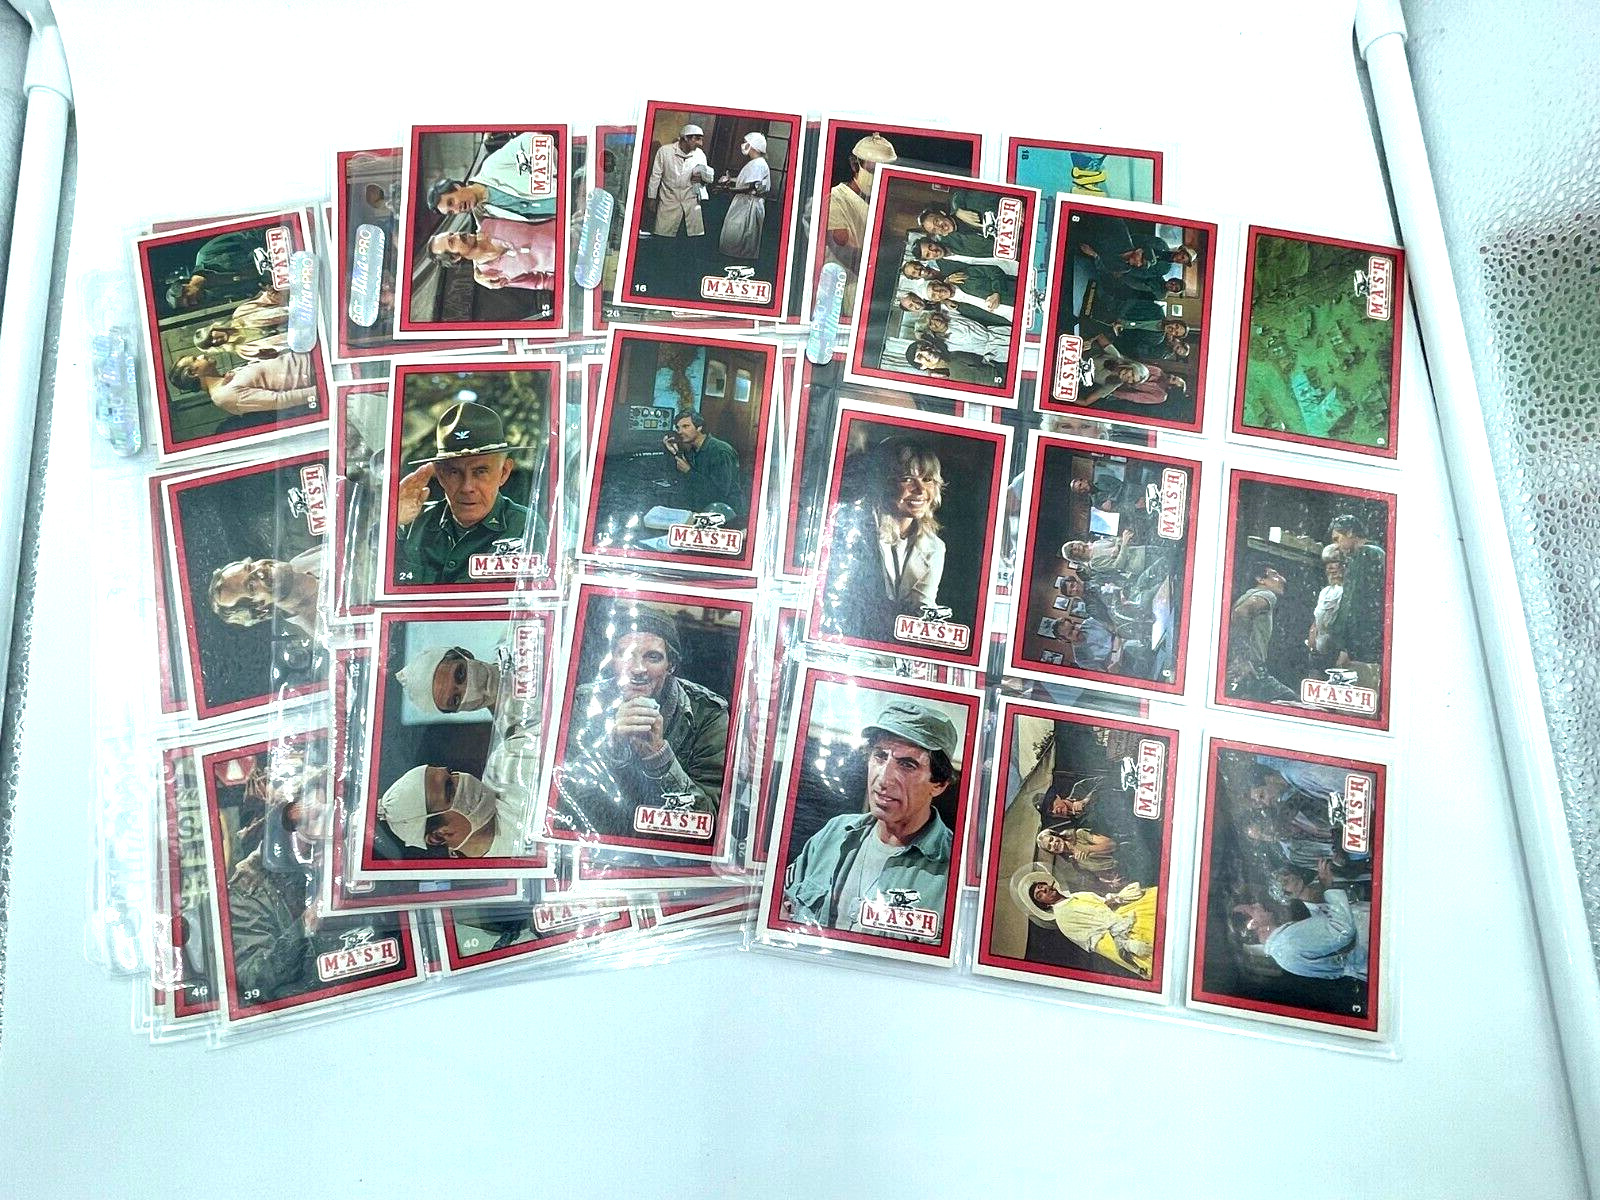 1982 Donruss Mash Trading Cards Lot. 66 Total Cards M*A*S*H Vintage Collection